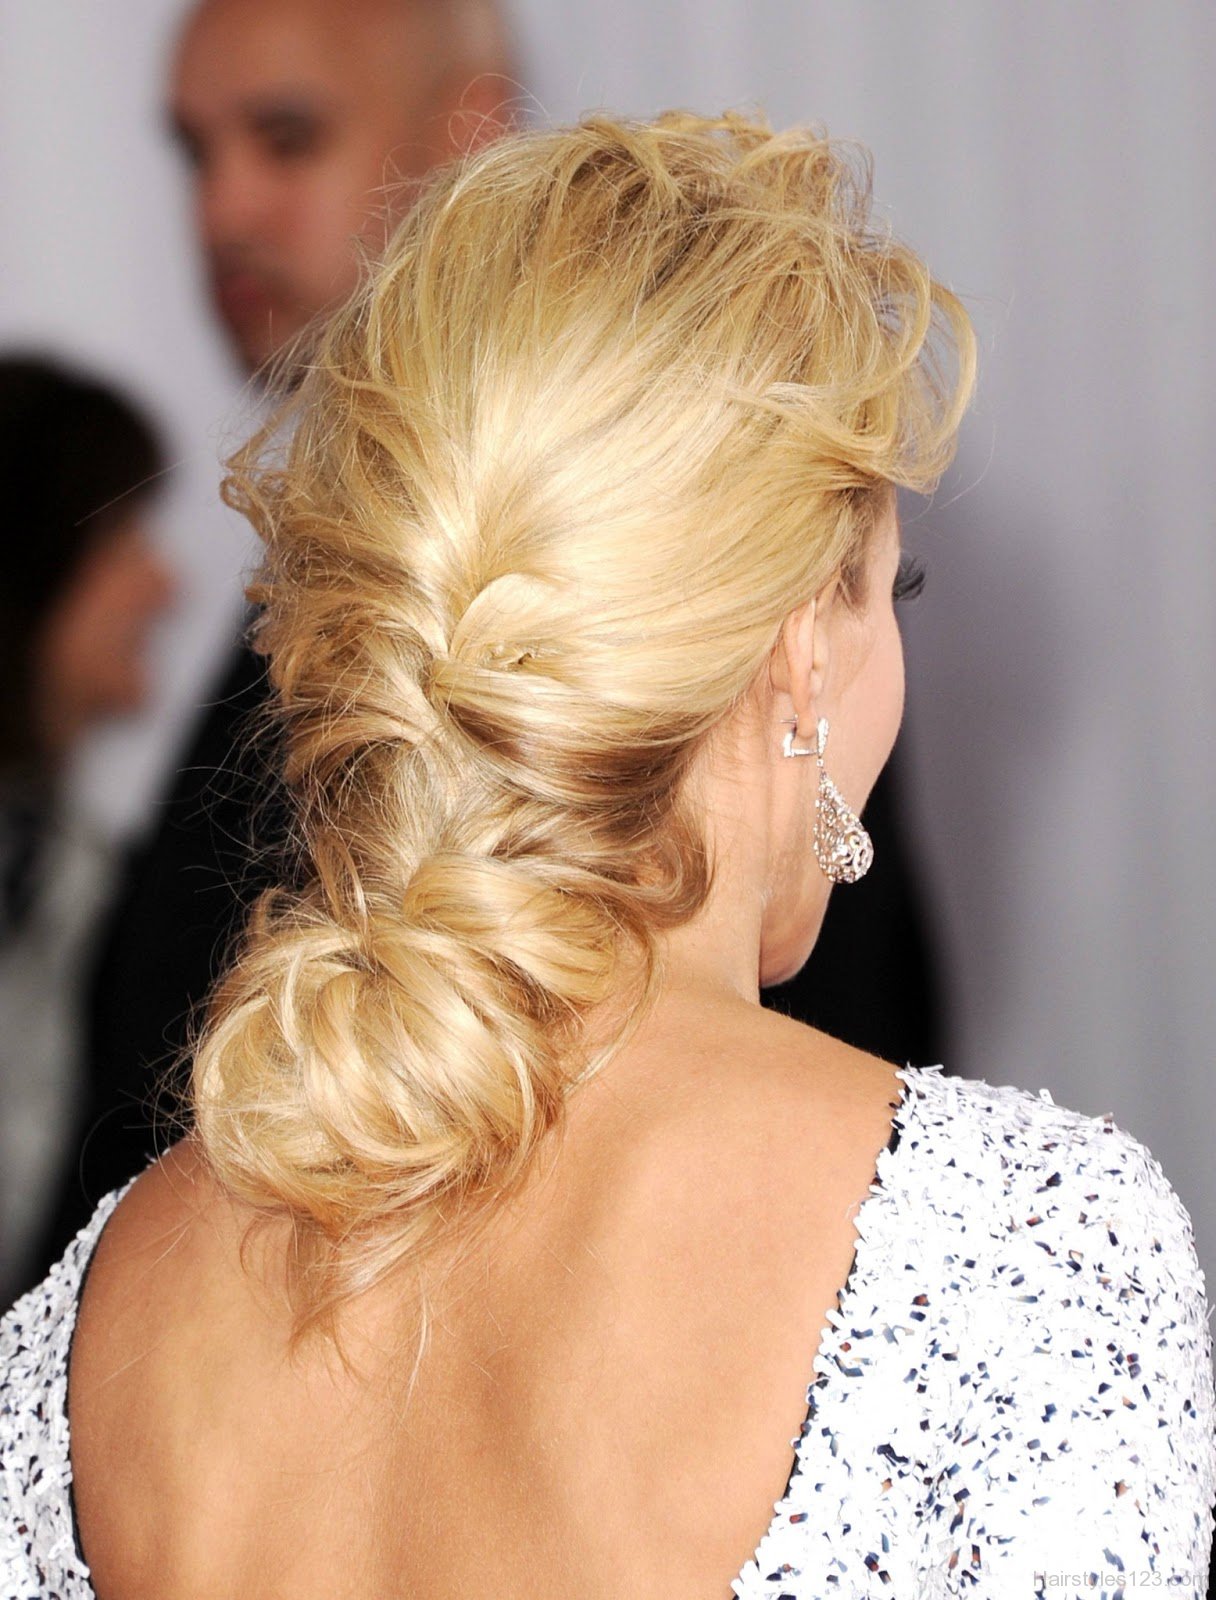 hairstyles braided hairstyles colored hairstyles prom hairstyles prom 